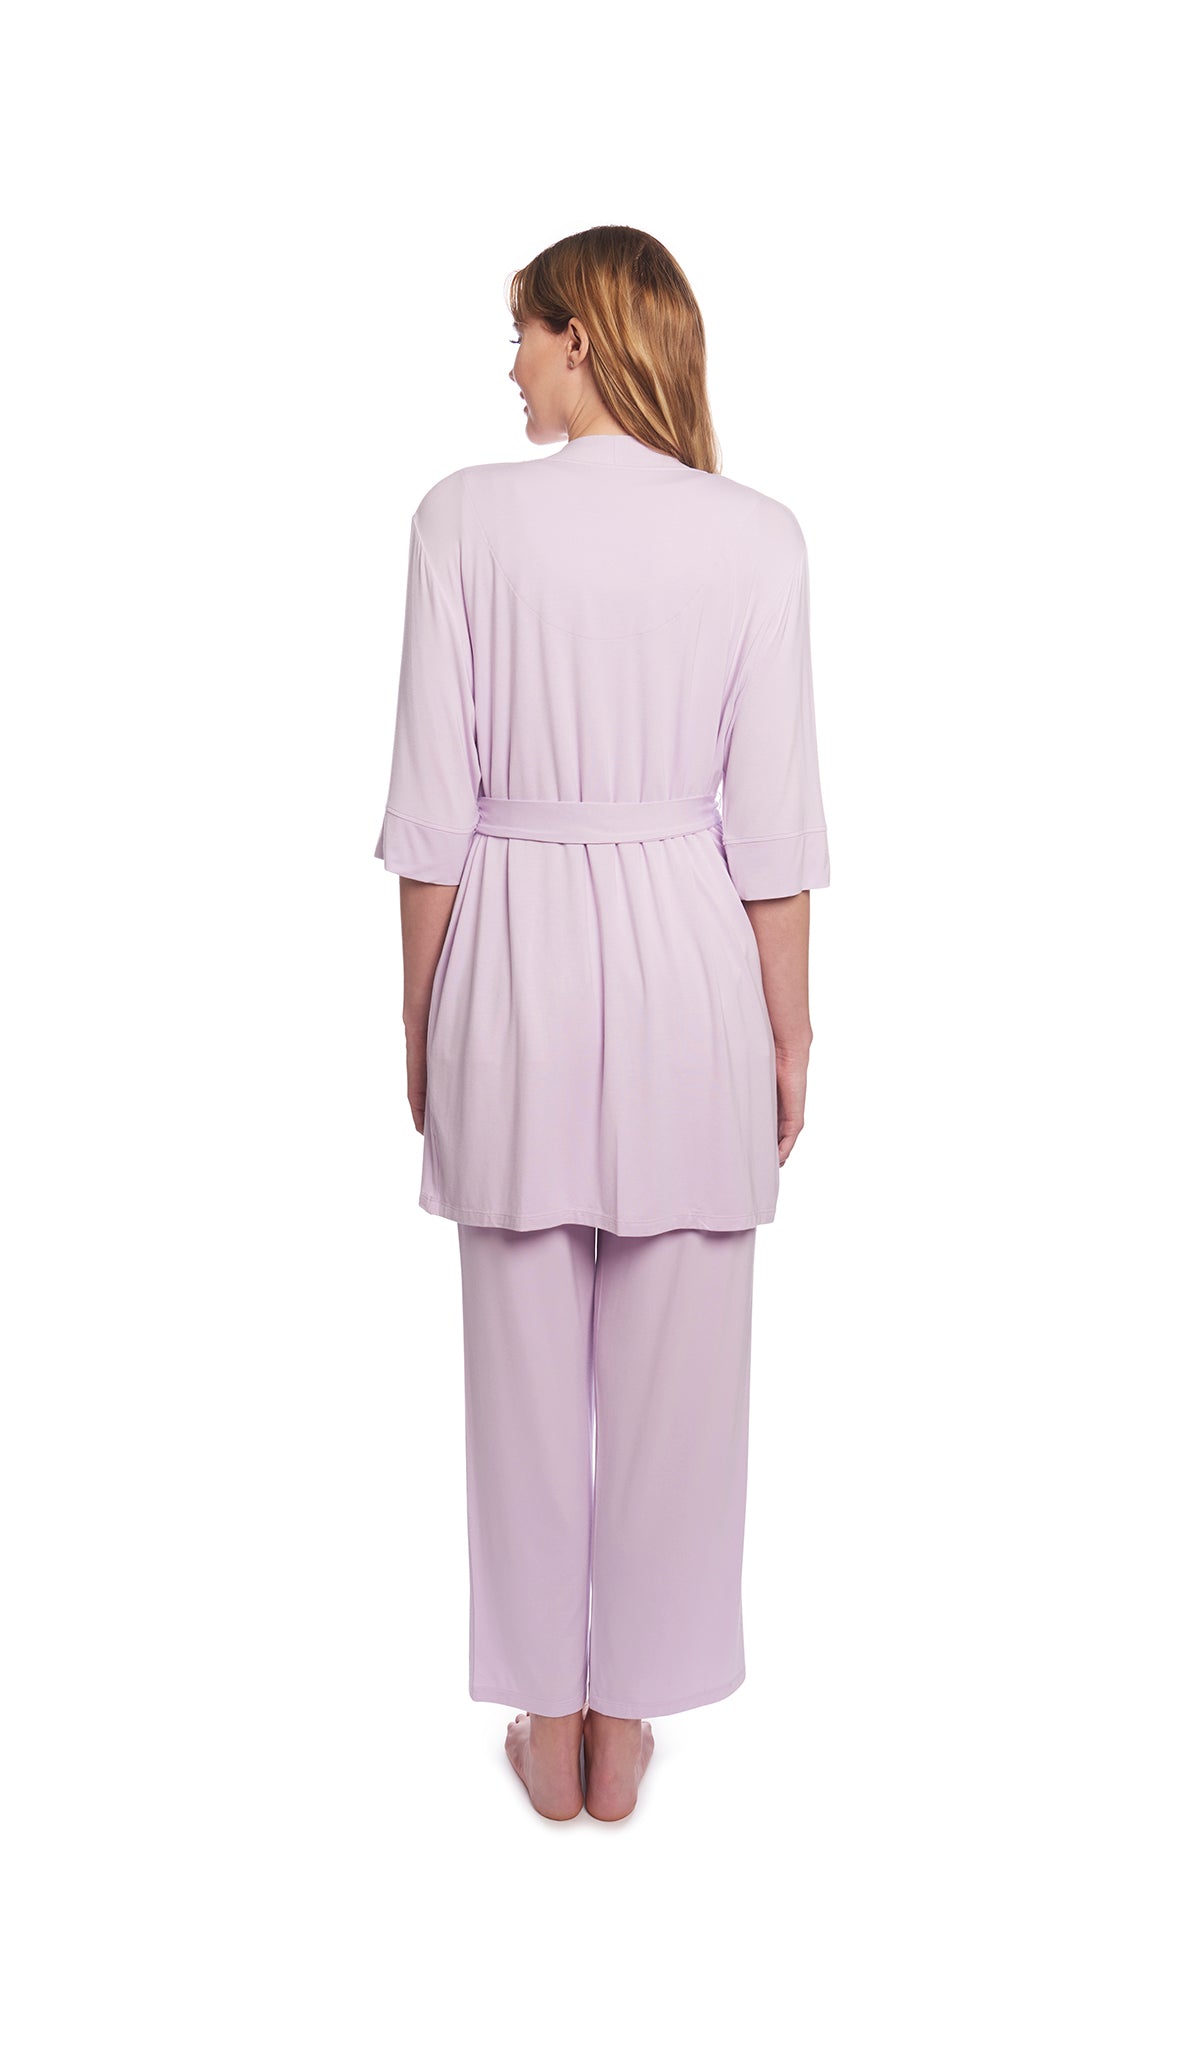 Lavender Analise 5-Piece Set, back shot of woman wearing robe and pant.